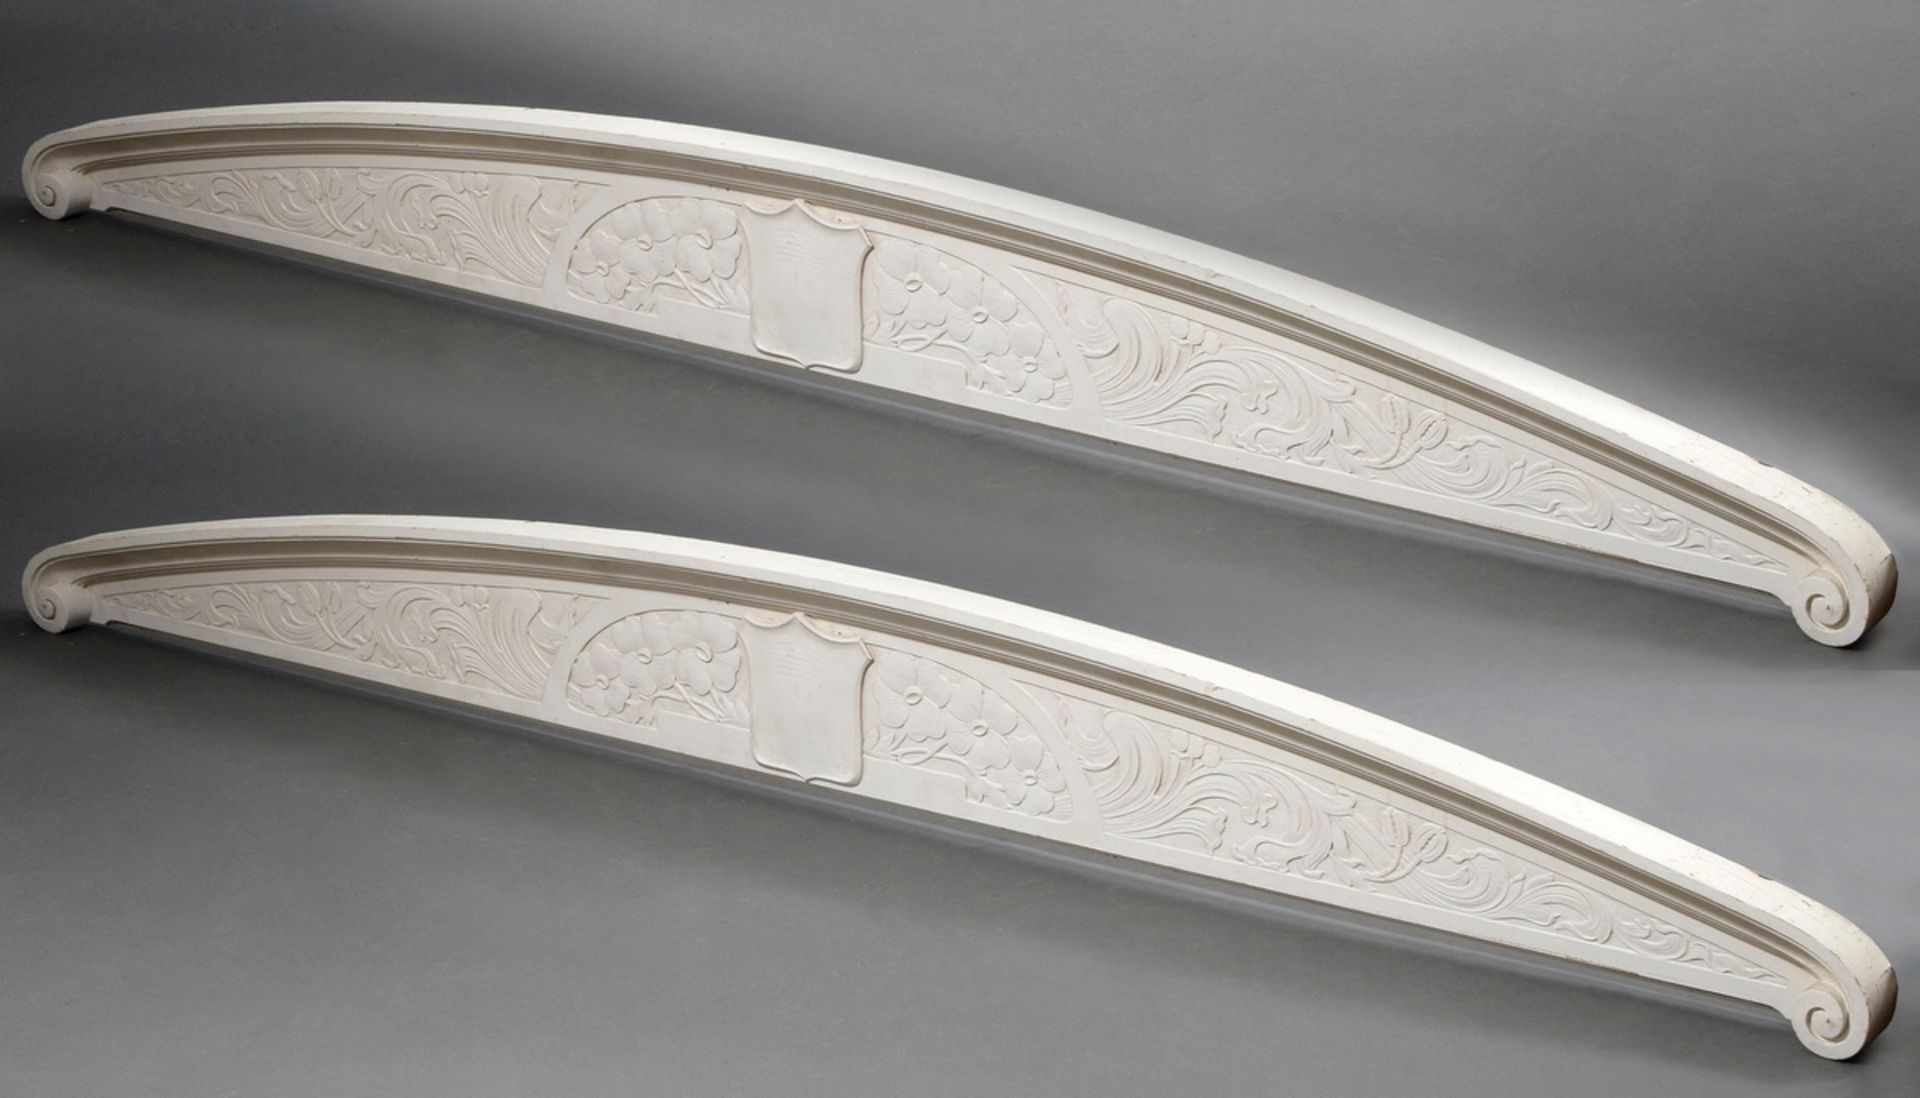 2 Art Nouveau supraports with arched finial and floral carving, white painted, Belgium c. 1900, 30x